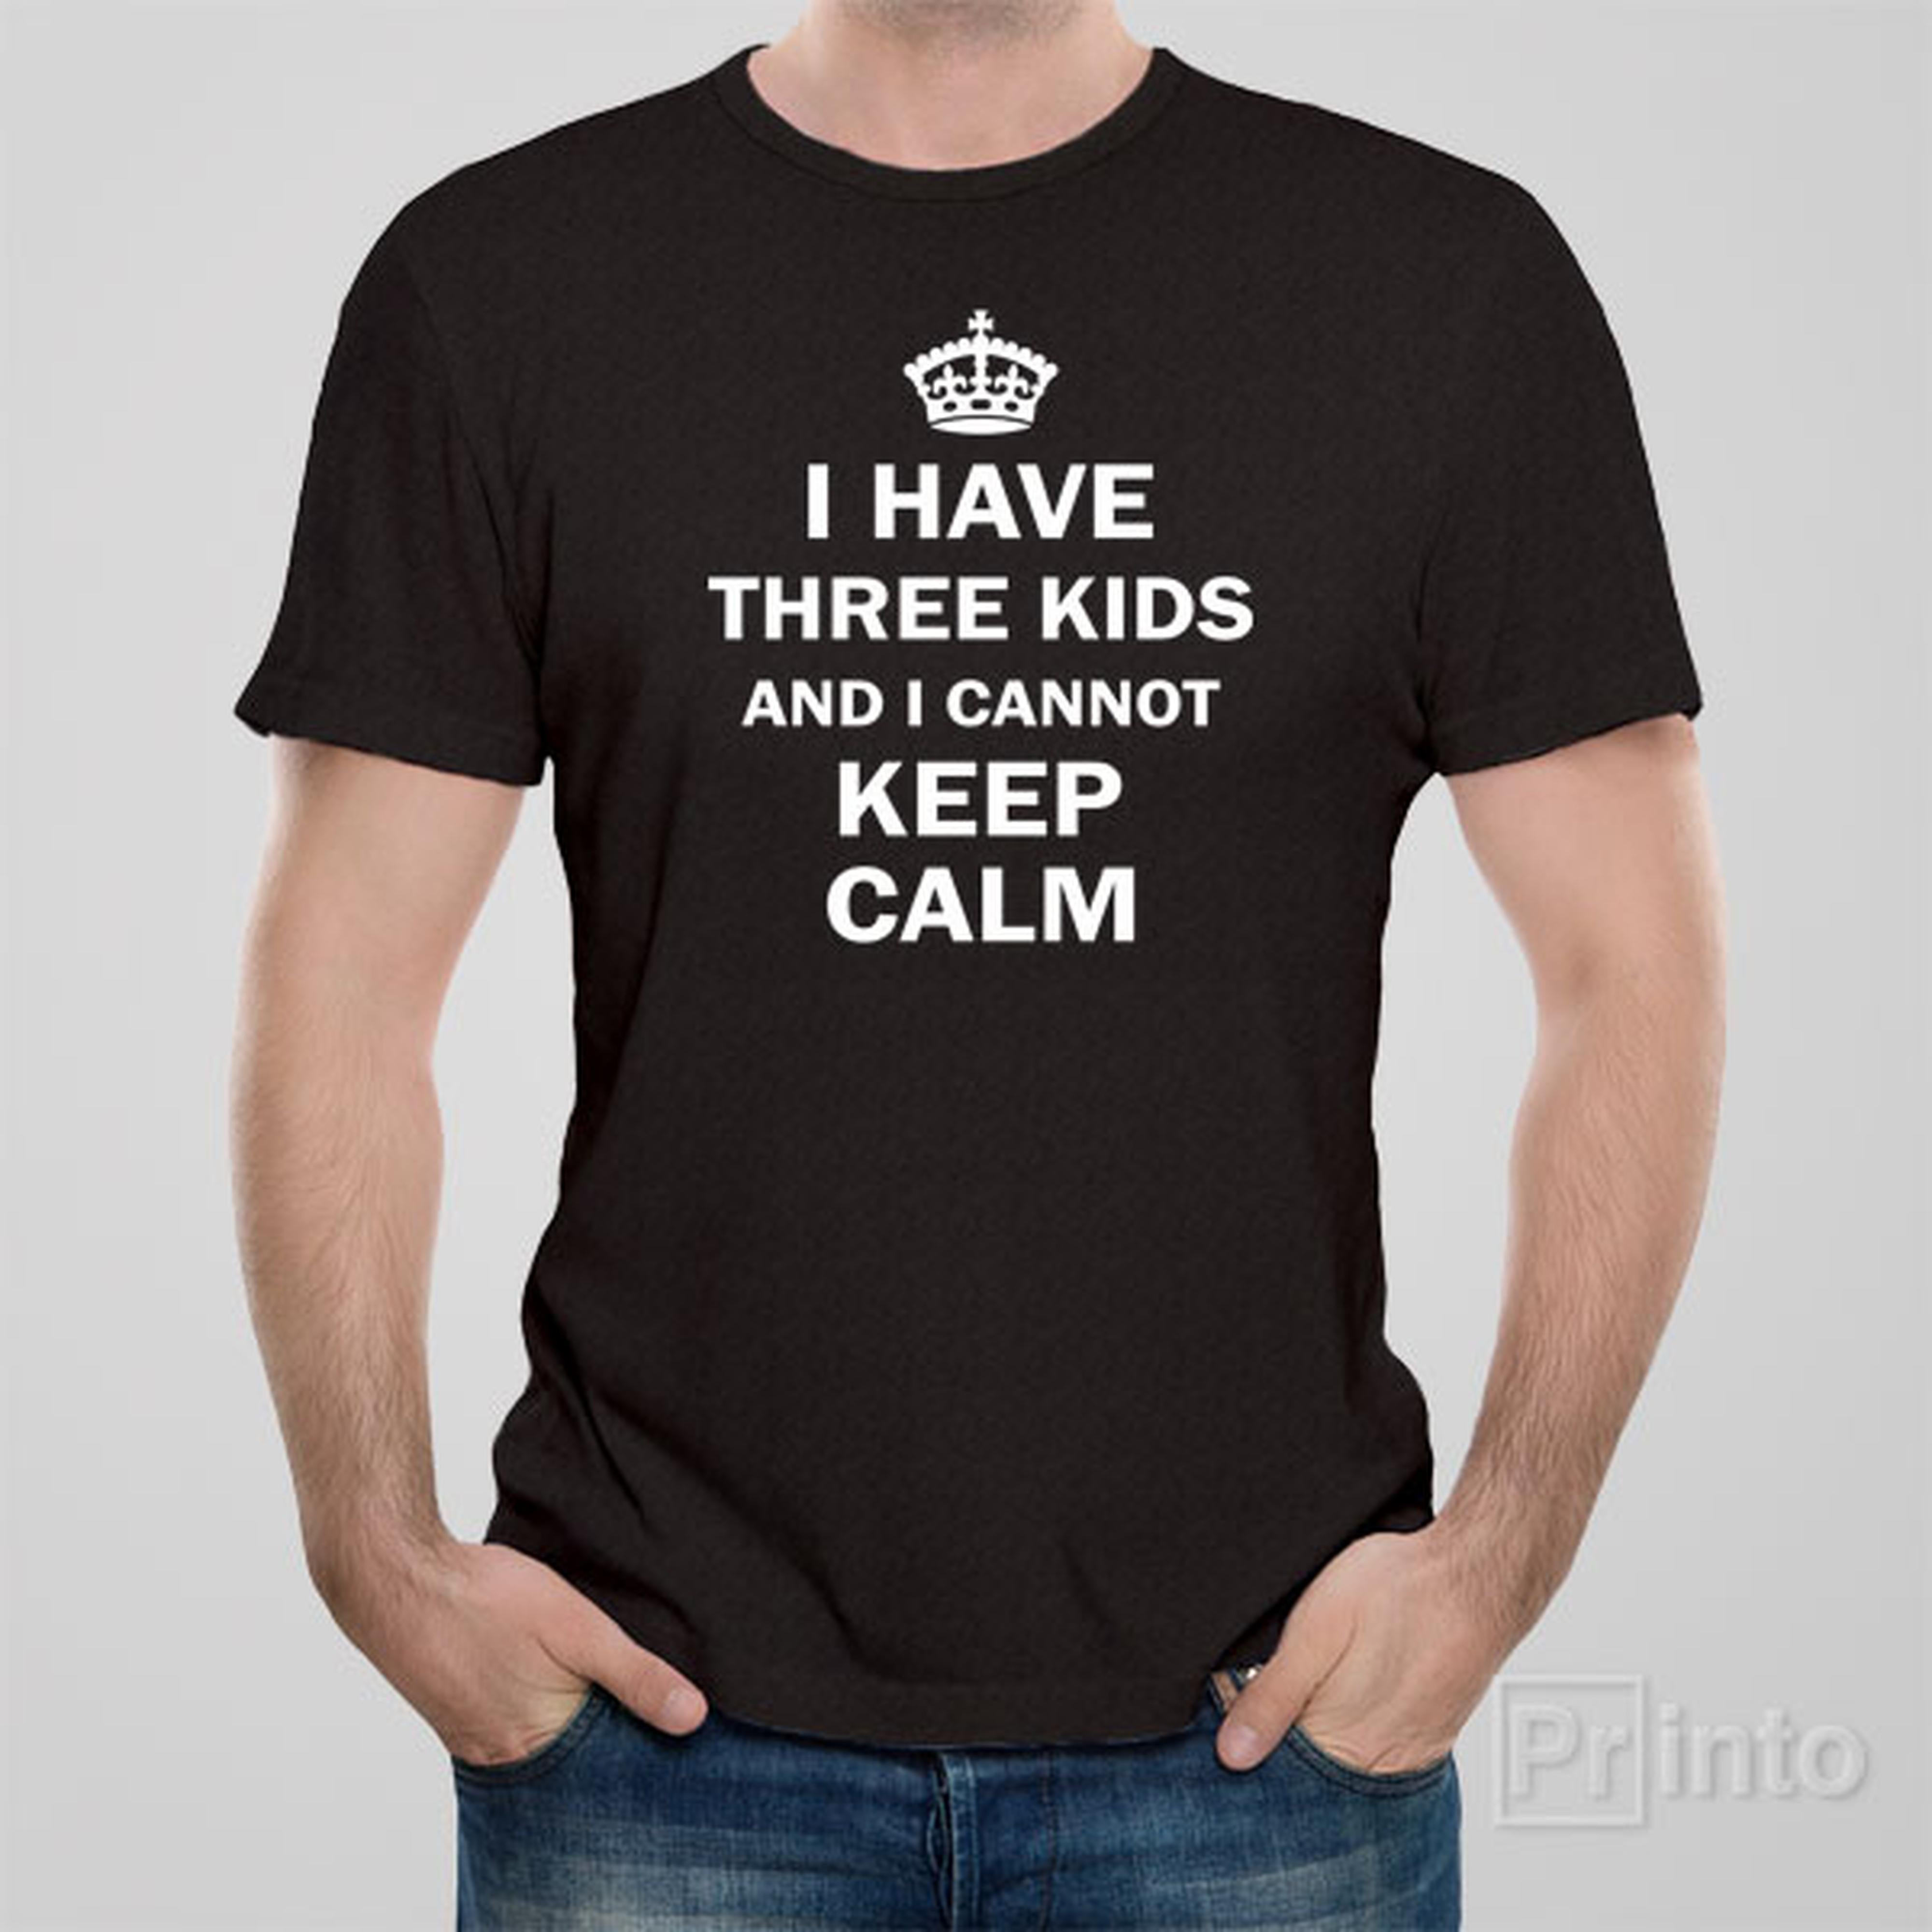 i-have-3-kids-and-i-cannot-keep-calm-t-shirt